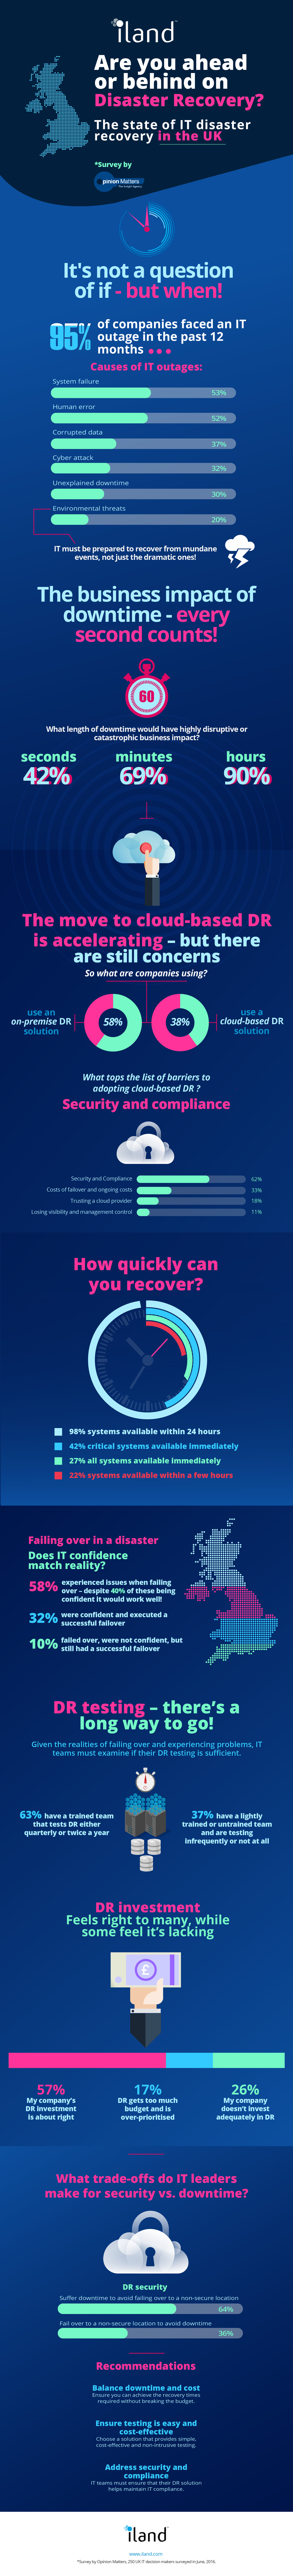 Infographic-UK-DRaaS-Survey